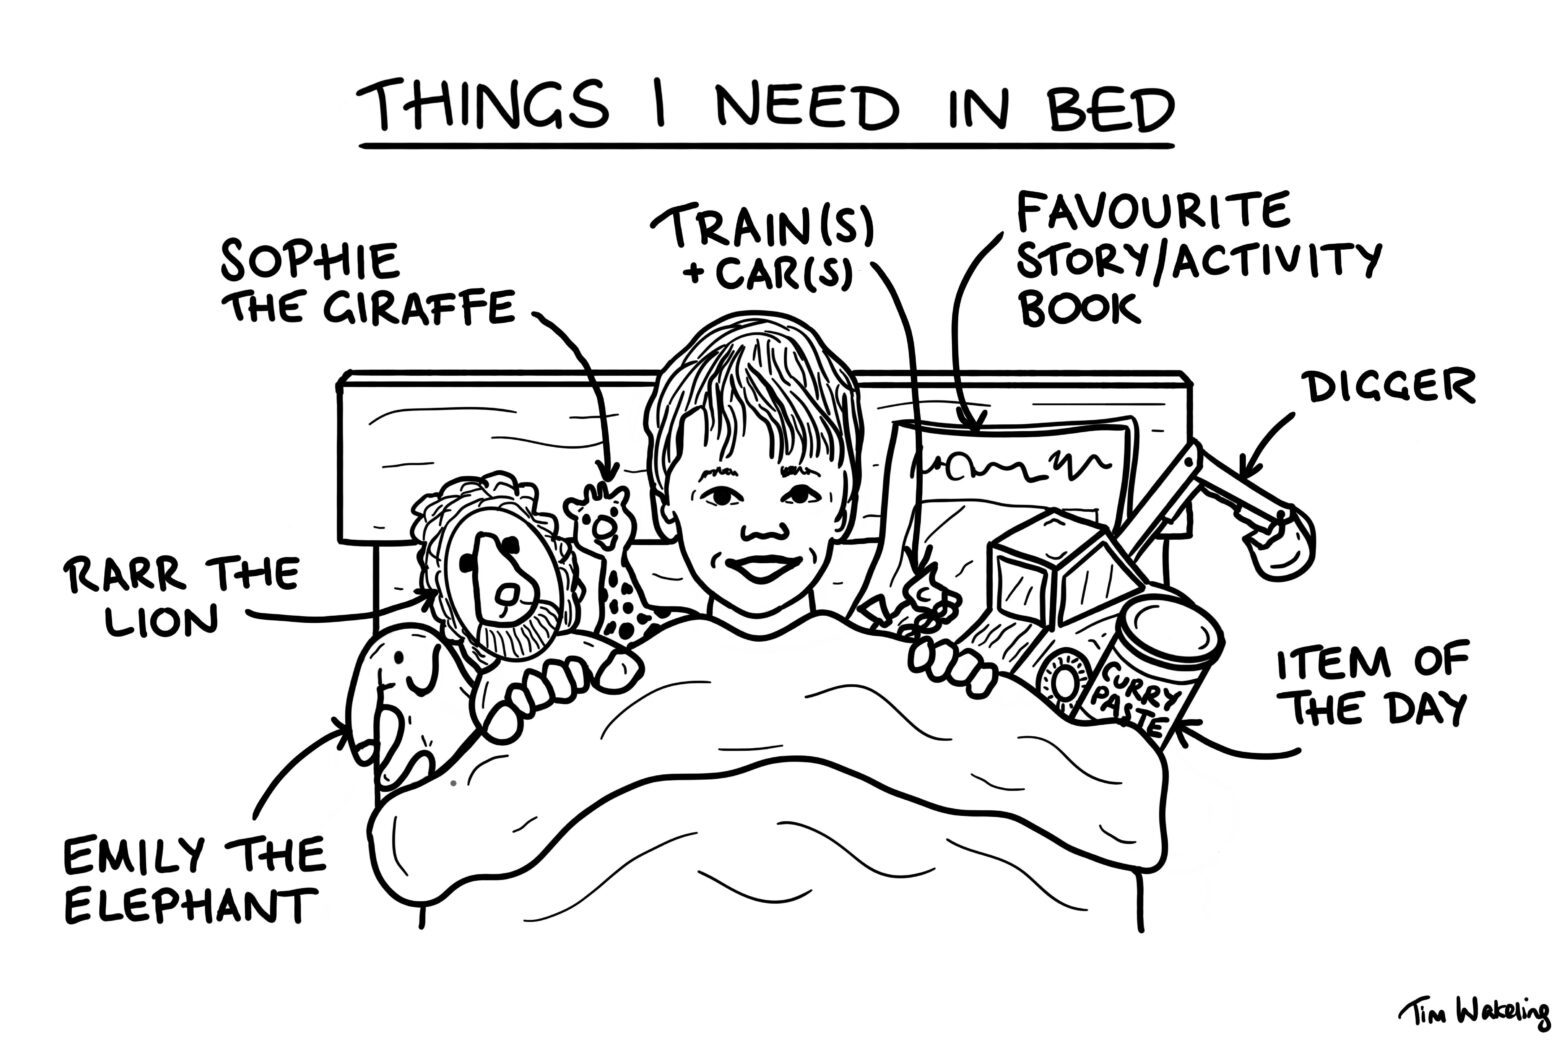 Things I need in bed